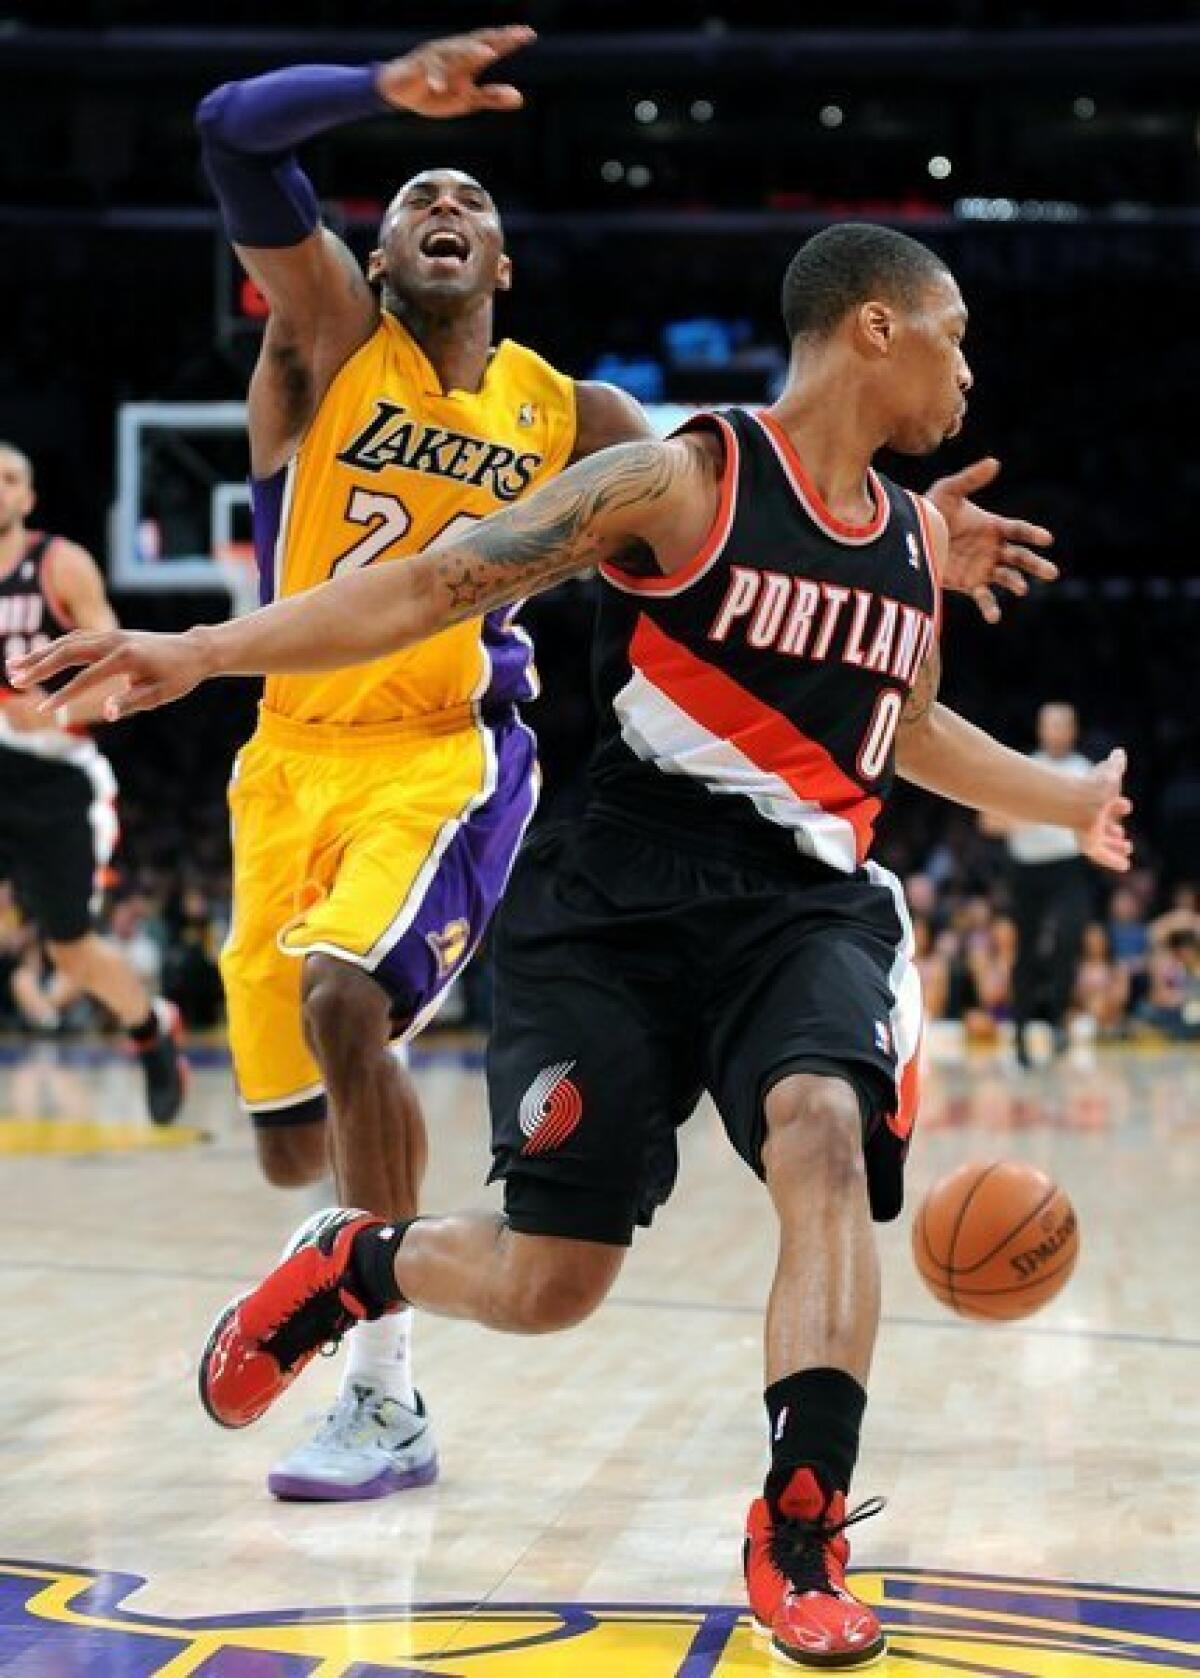 Kobe Bryant is likely to spend some time defending Portland's explosive rookie guard, Damian Lillard.